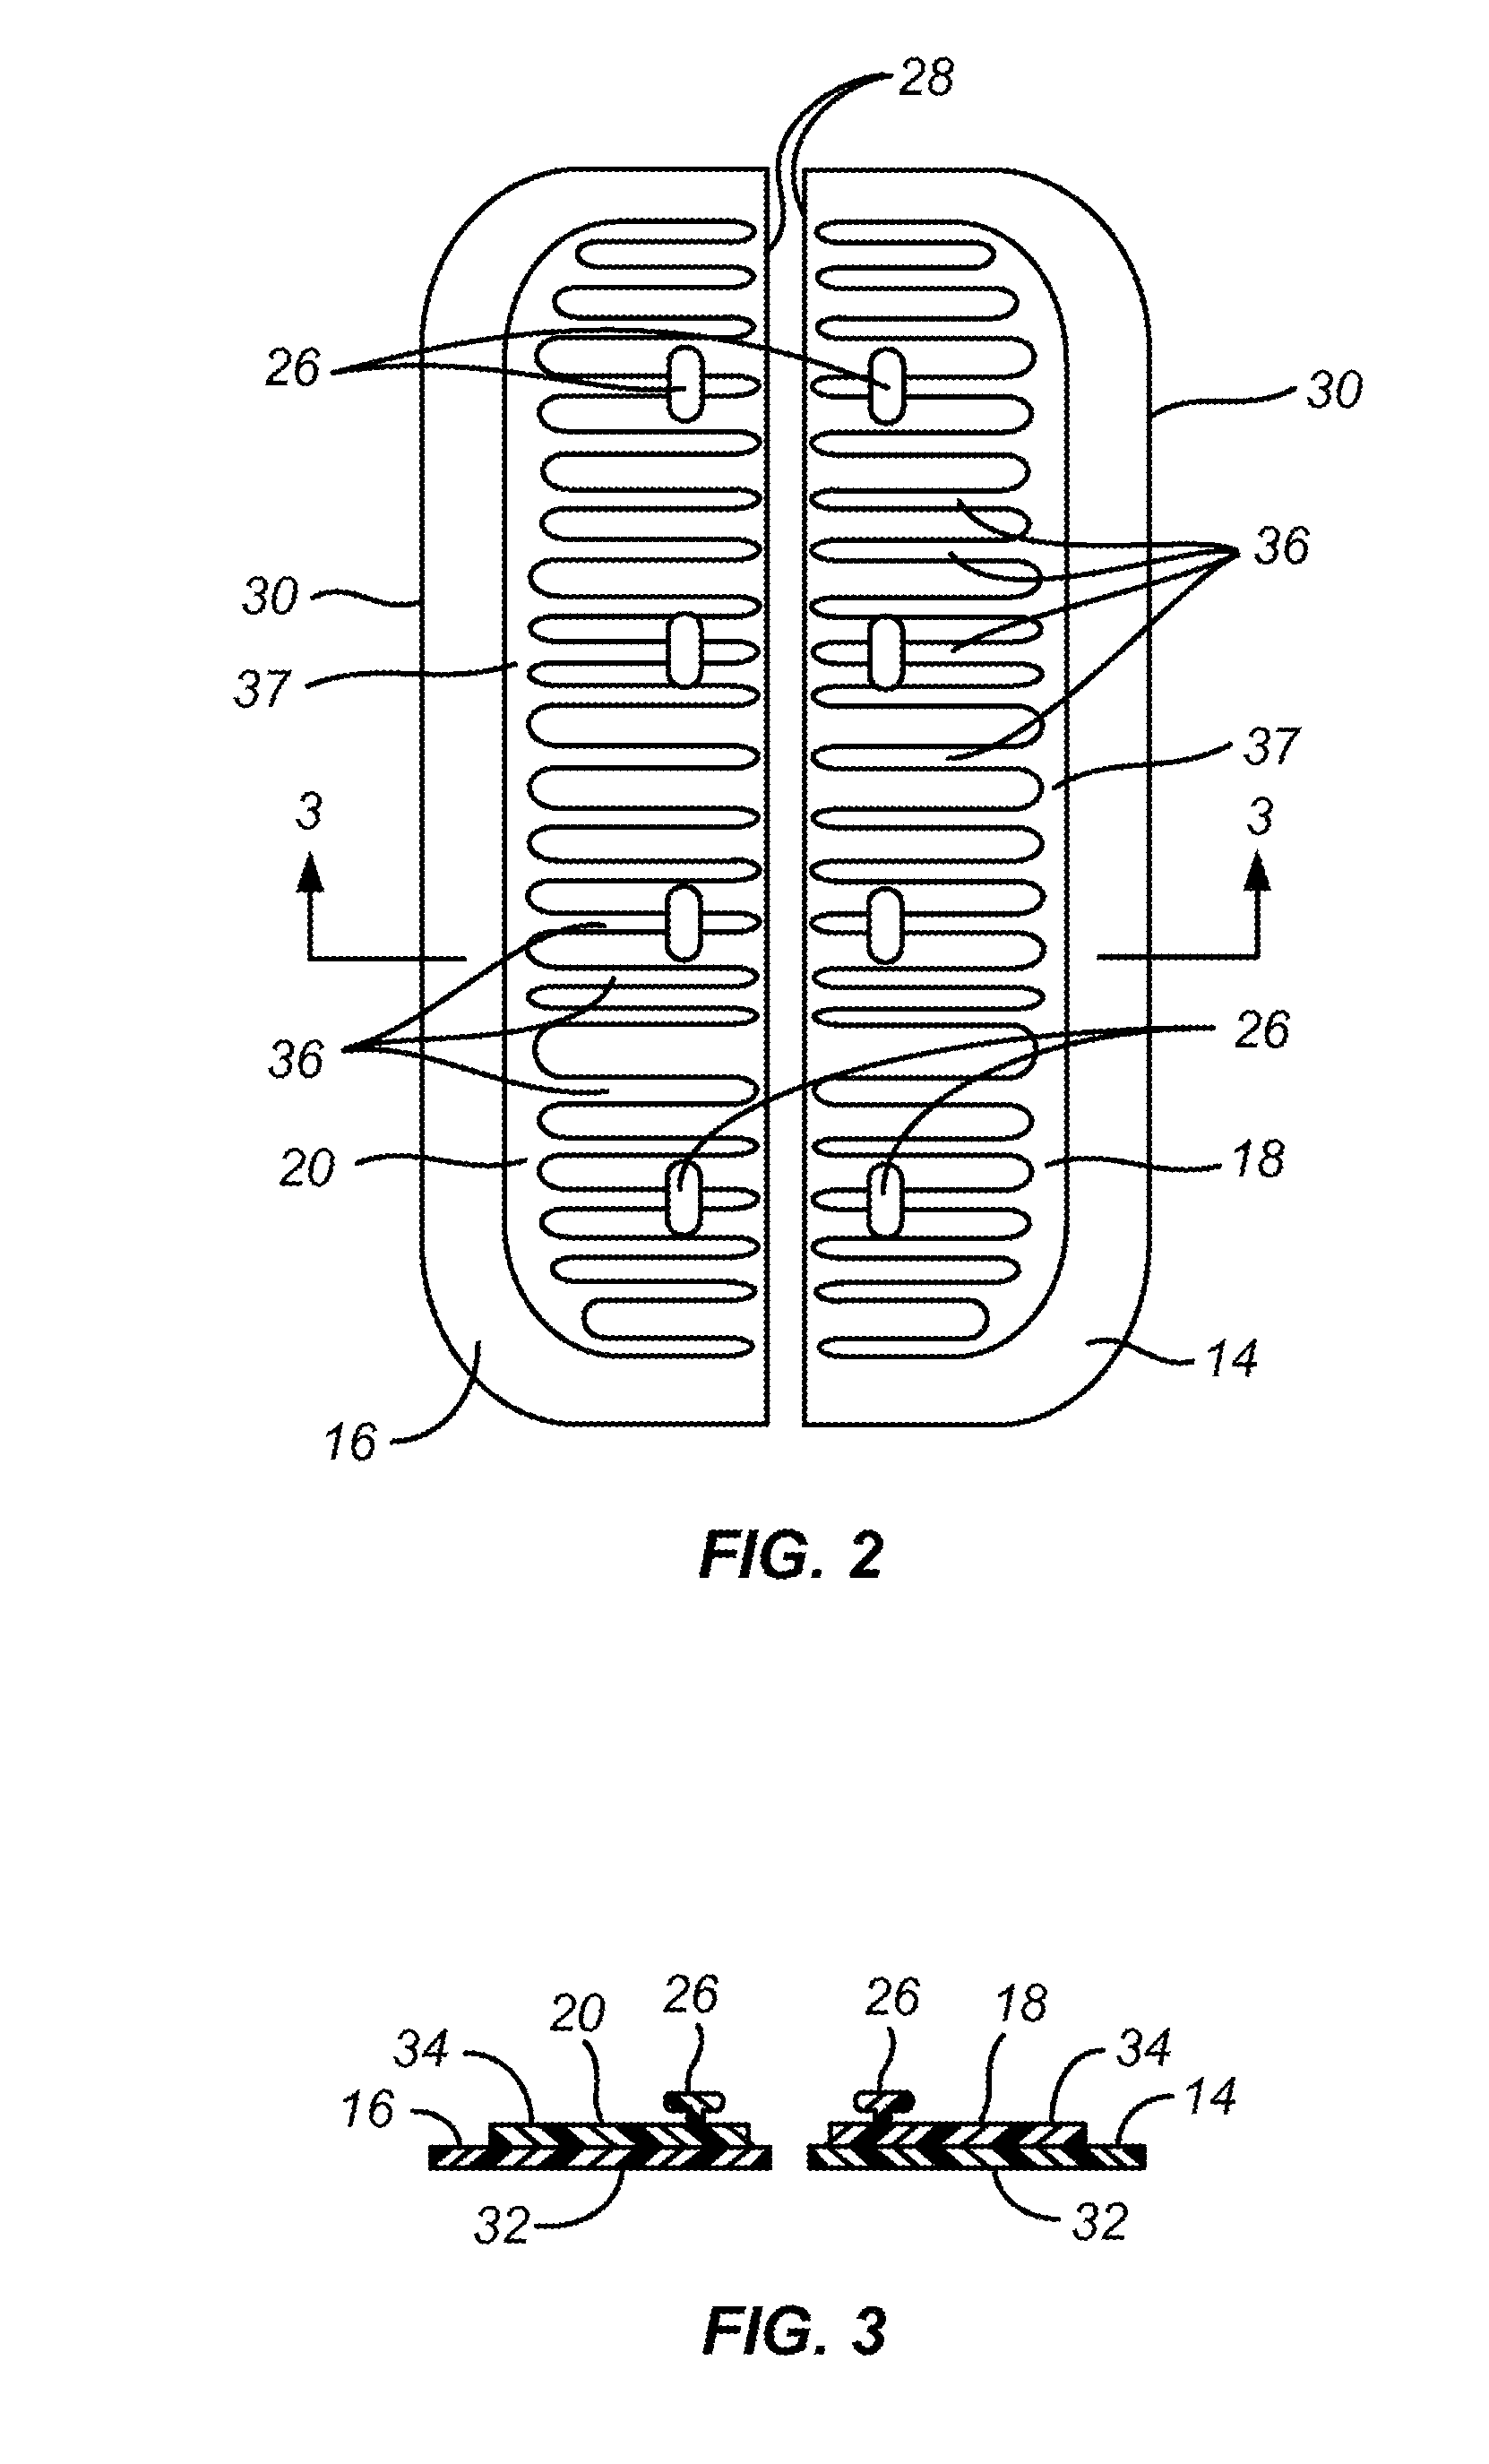 Surgical incision and closure apparatus